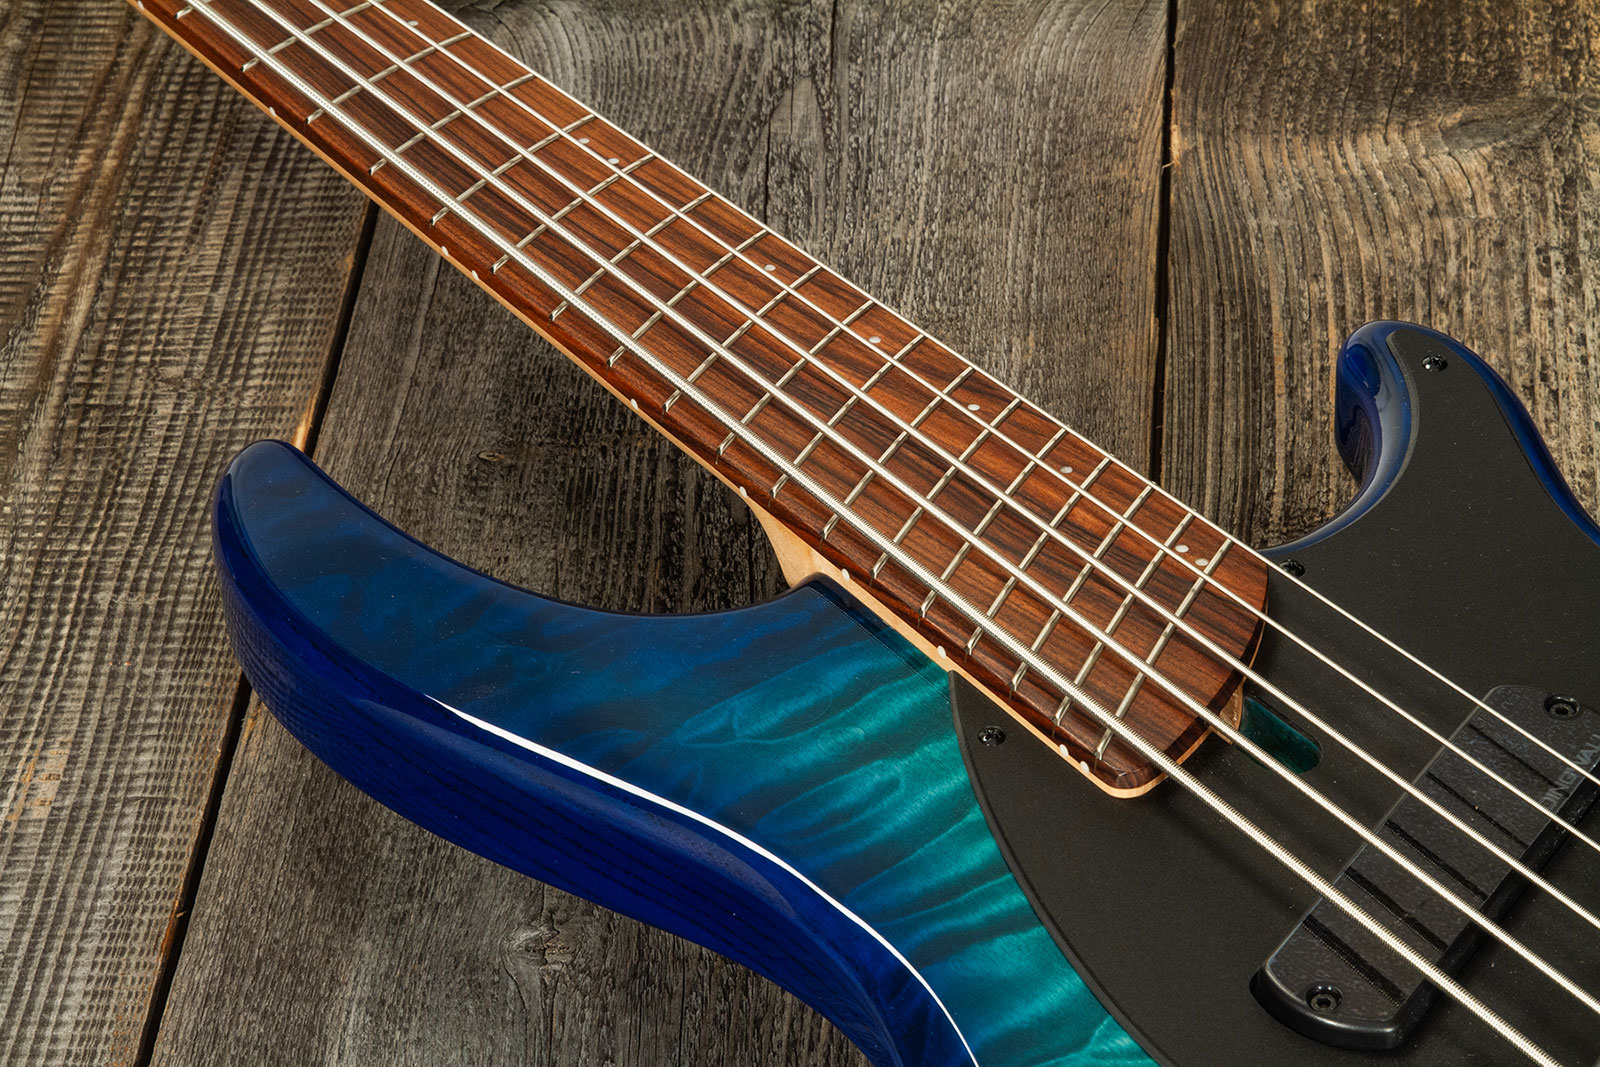 Dingwall Combustion Cb2 5c 2pu Active Pf - Whalepool Burst - Solid body electric bass - Variation 3